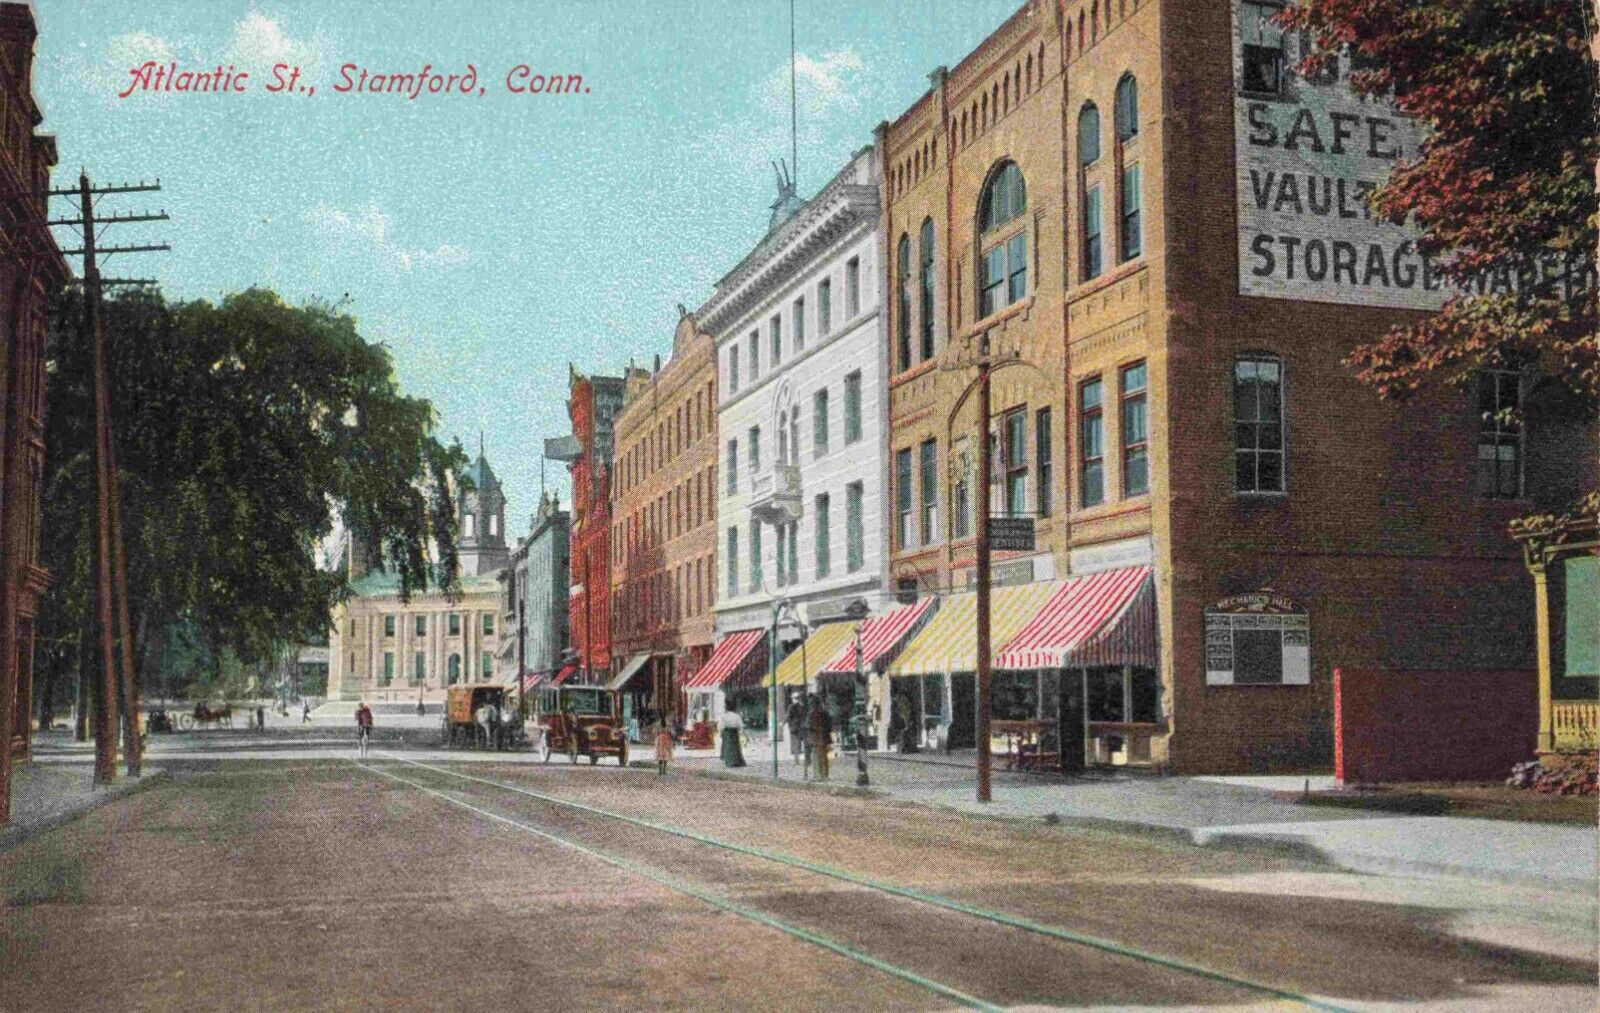 c1907 Stamford Connecticut Atlantic Street Trolley Lines Old Downtown Postcard